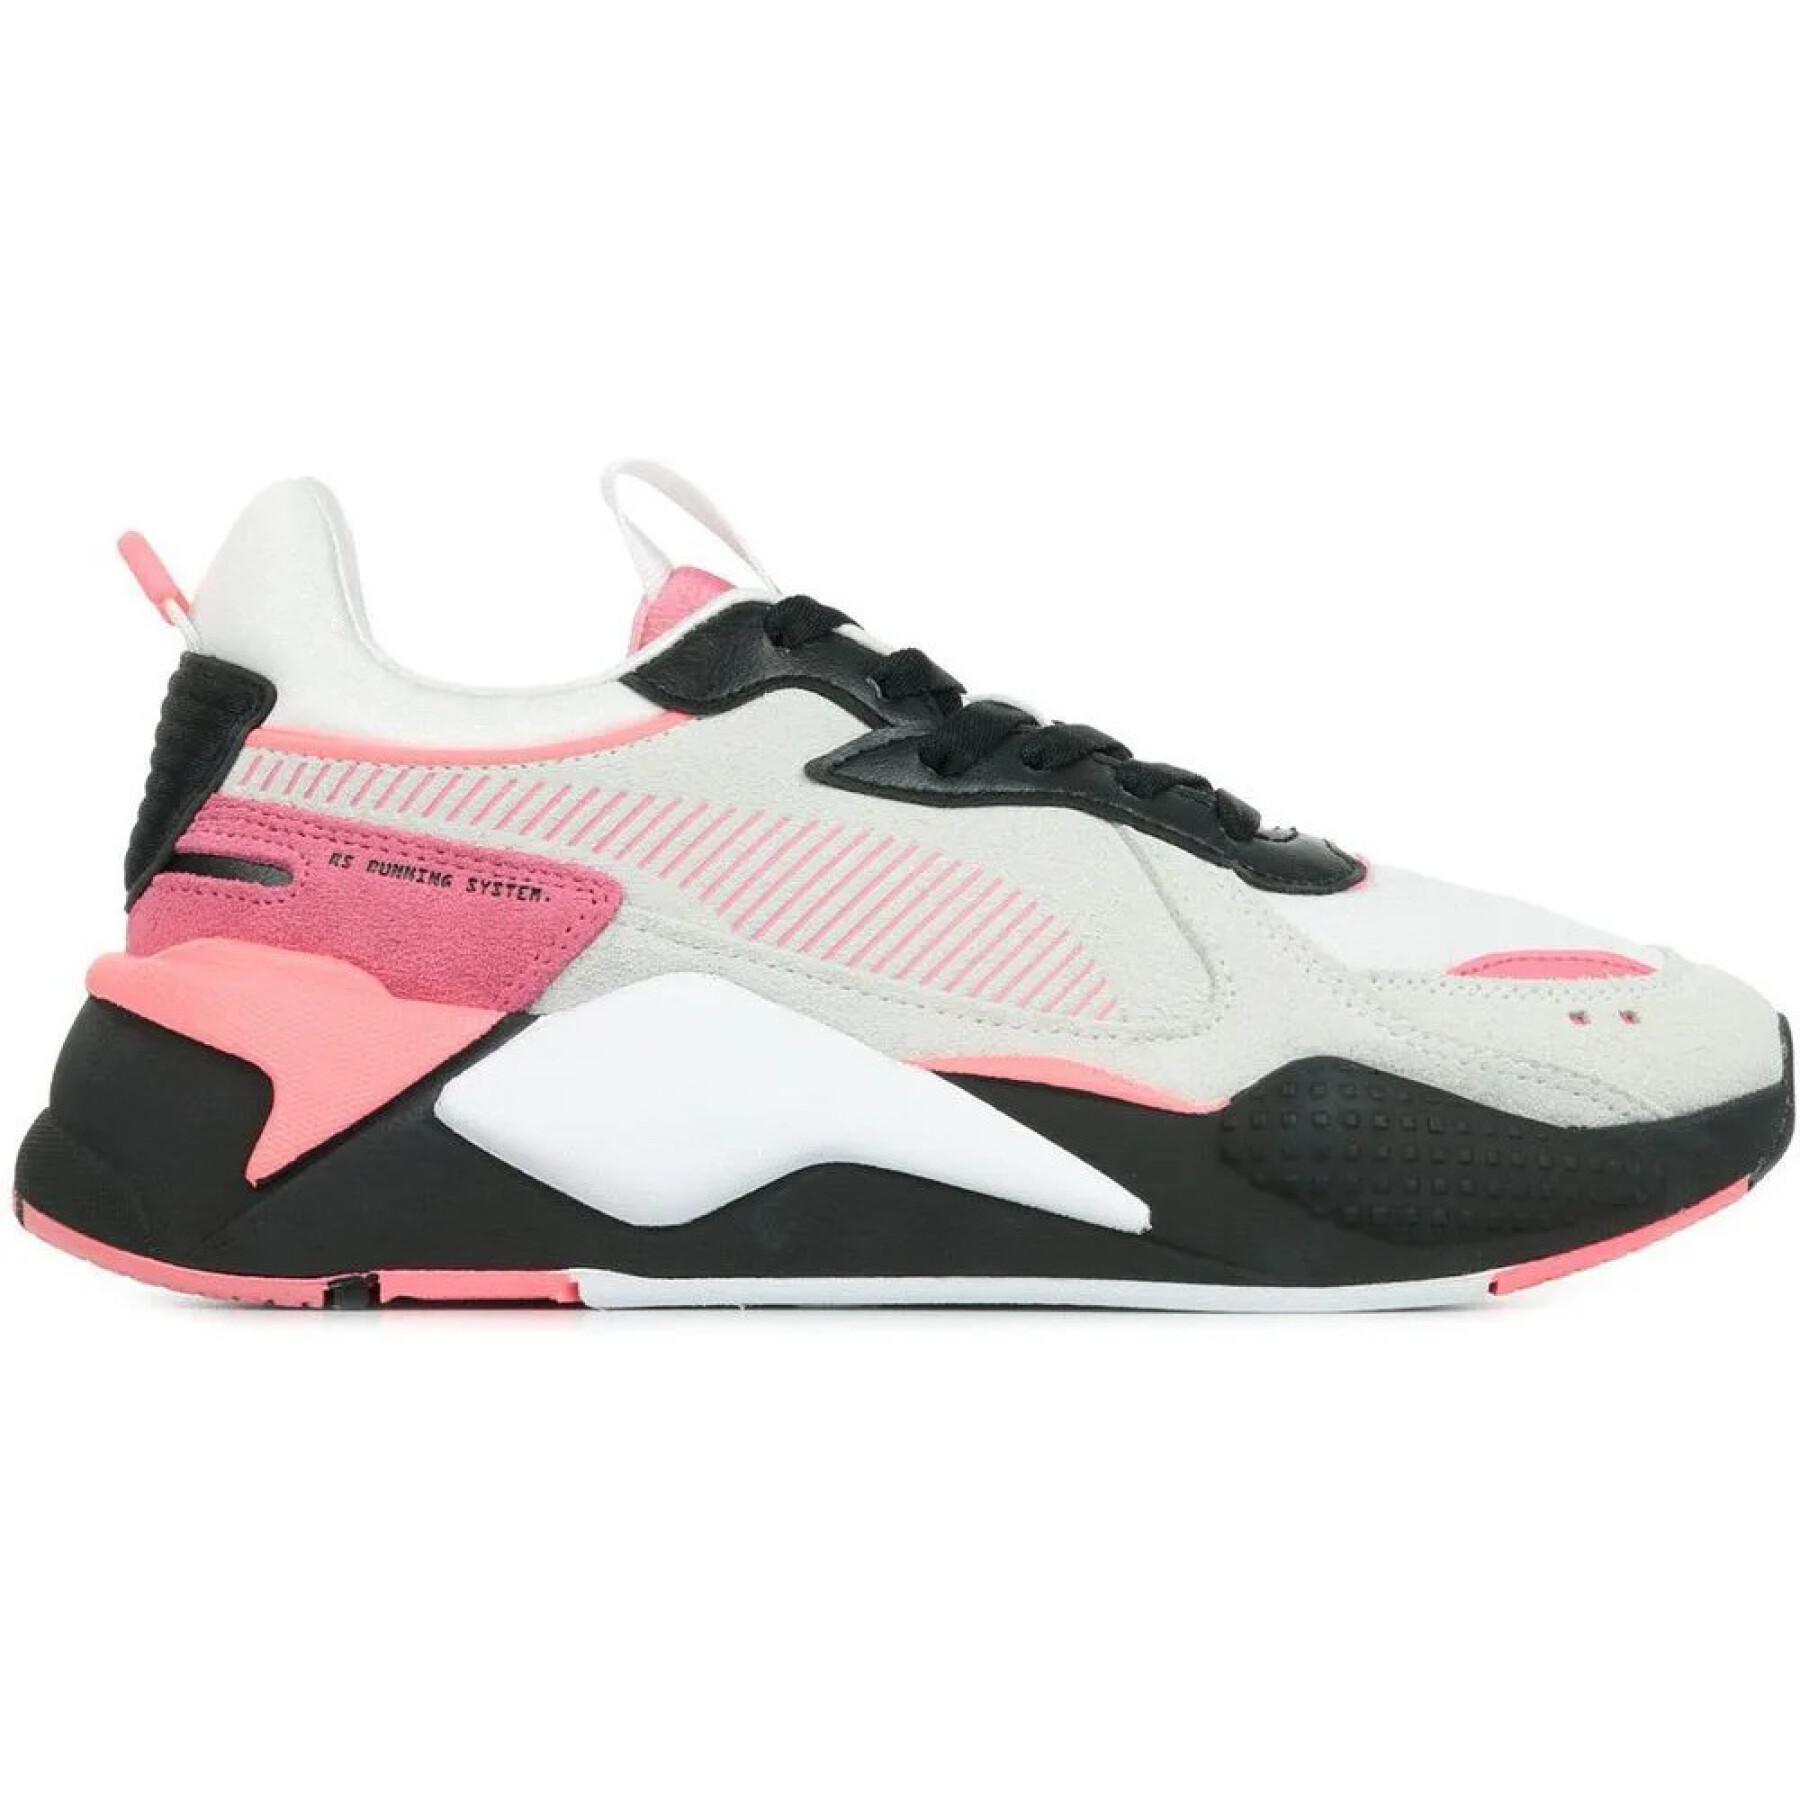 Women's sneakers Puma Rs-x reinvent